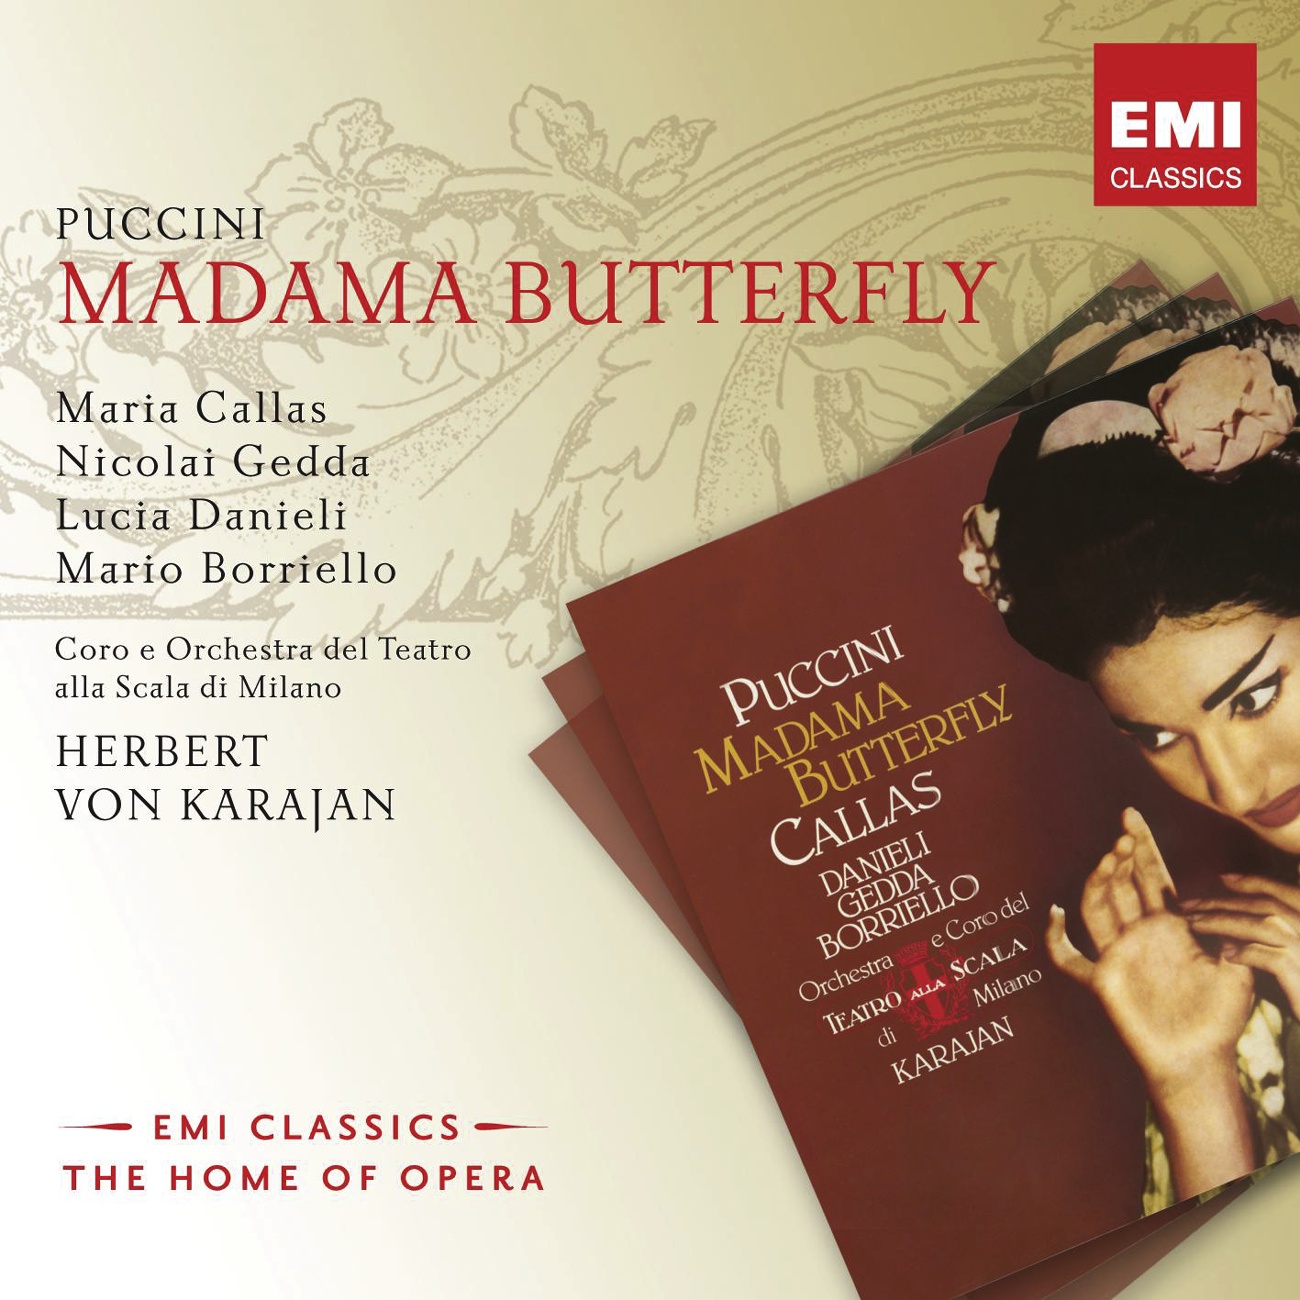 Madama Butterfly (2008 Remastered Version), Act II, First Part: Or vienmi ad adornar